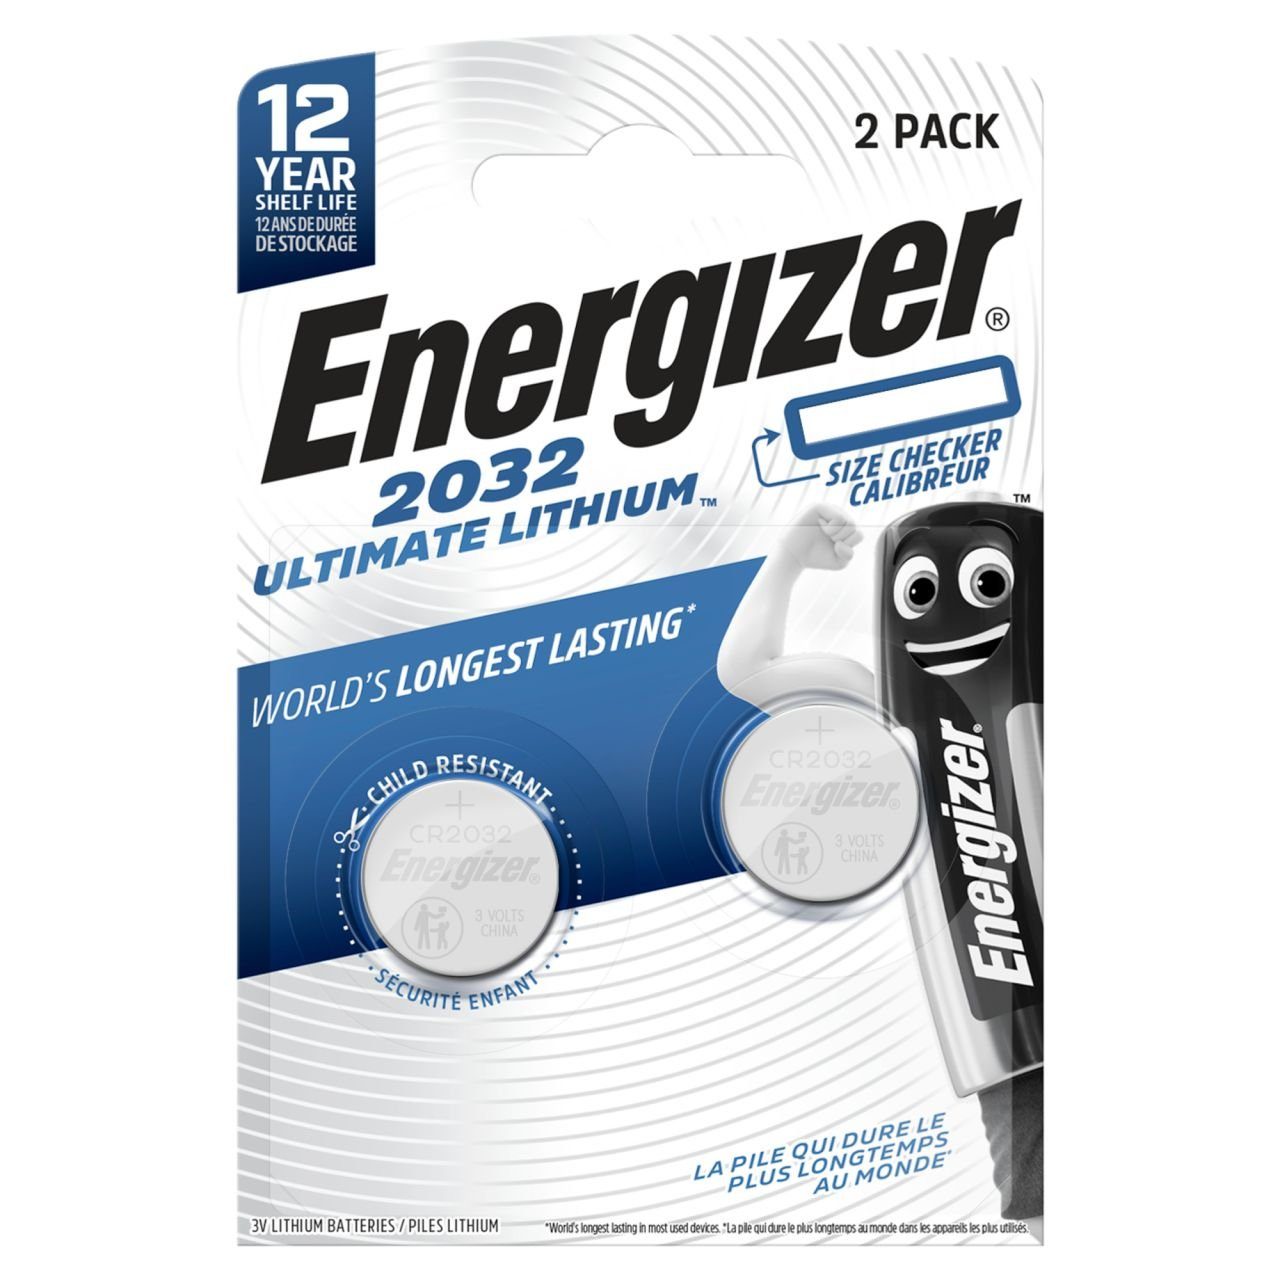 Energizer Energizer Knopfzelle CR 2032 Ultimate Lithium, 3 Batterie